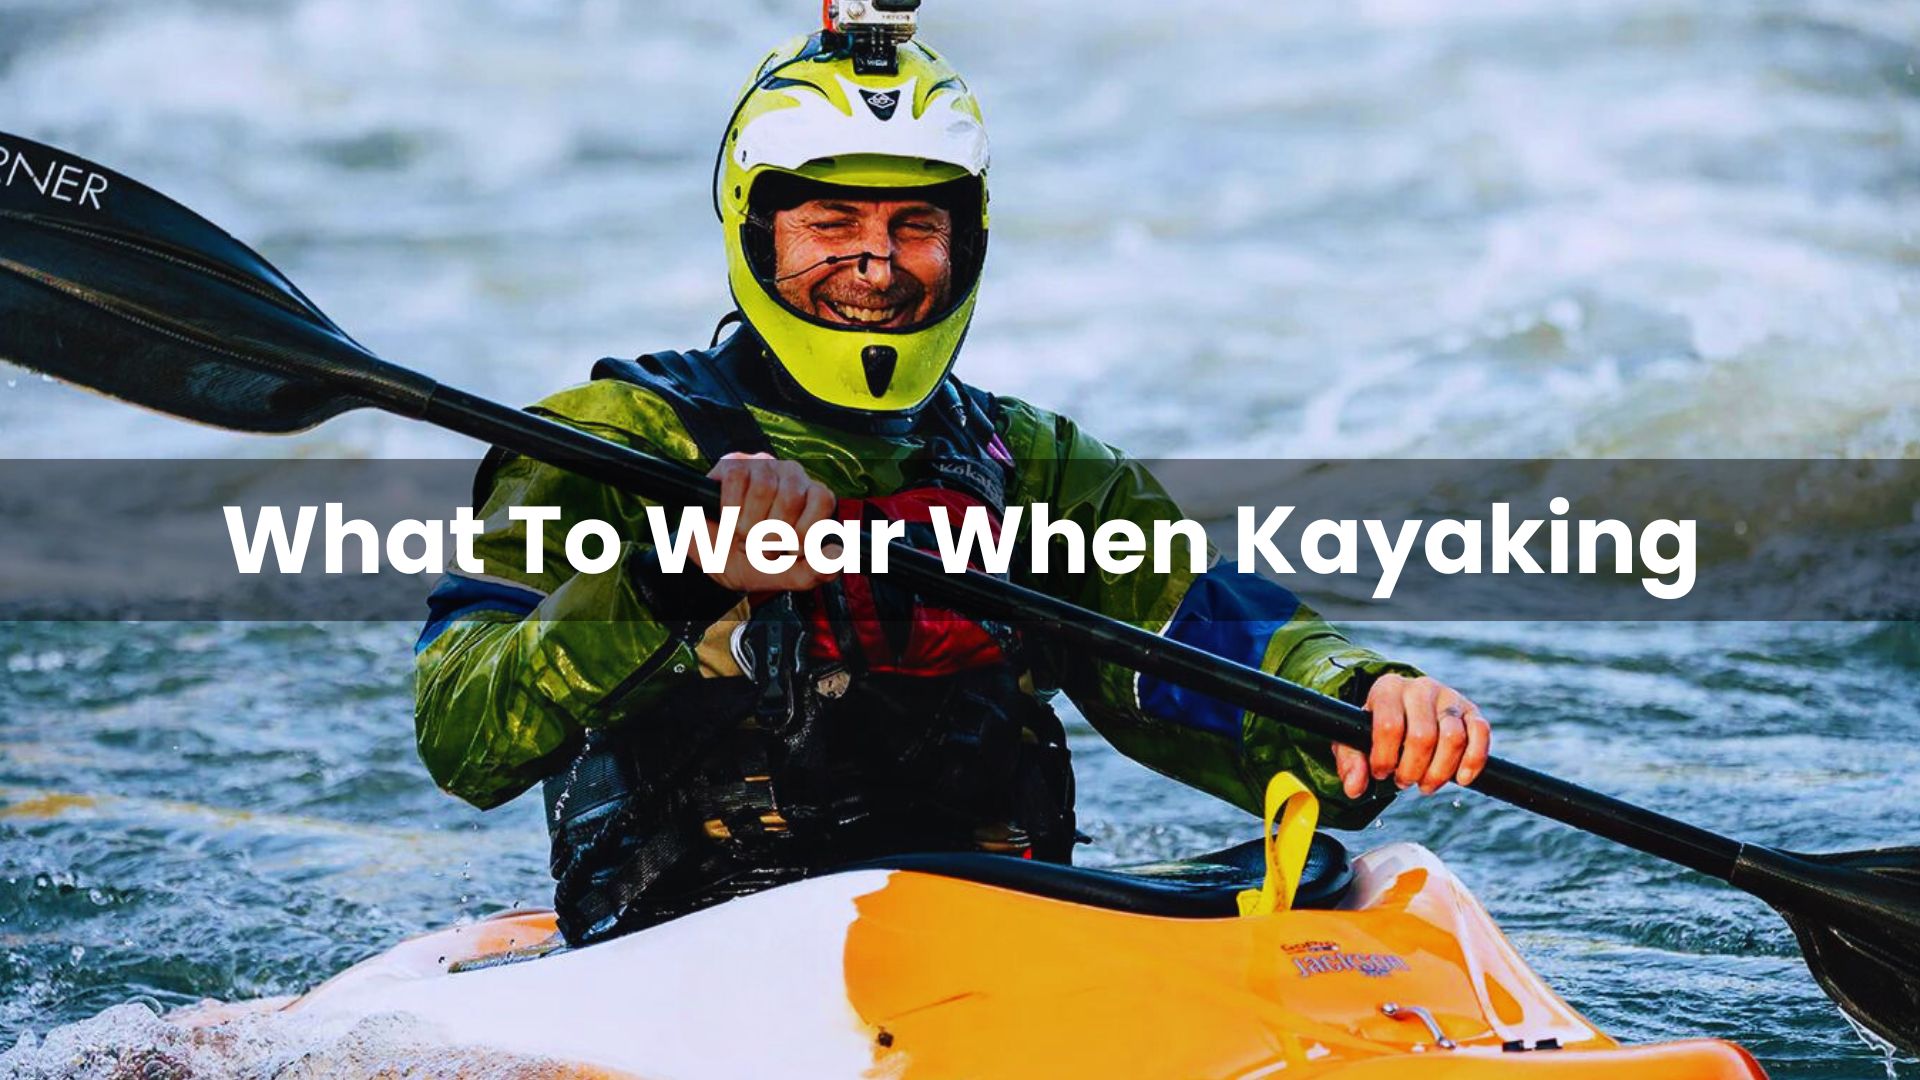 What To Wear When Kayaking